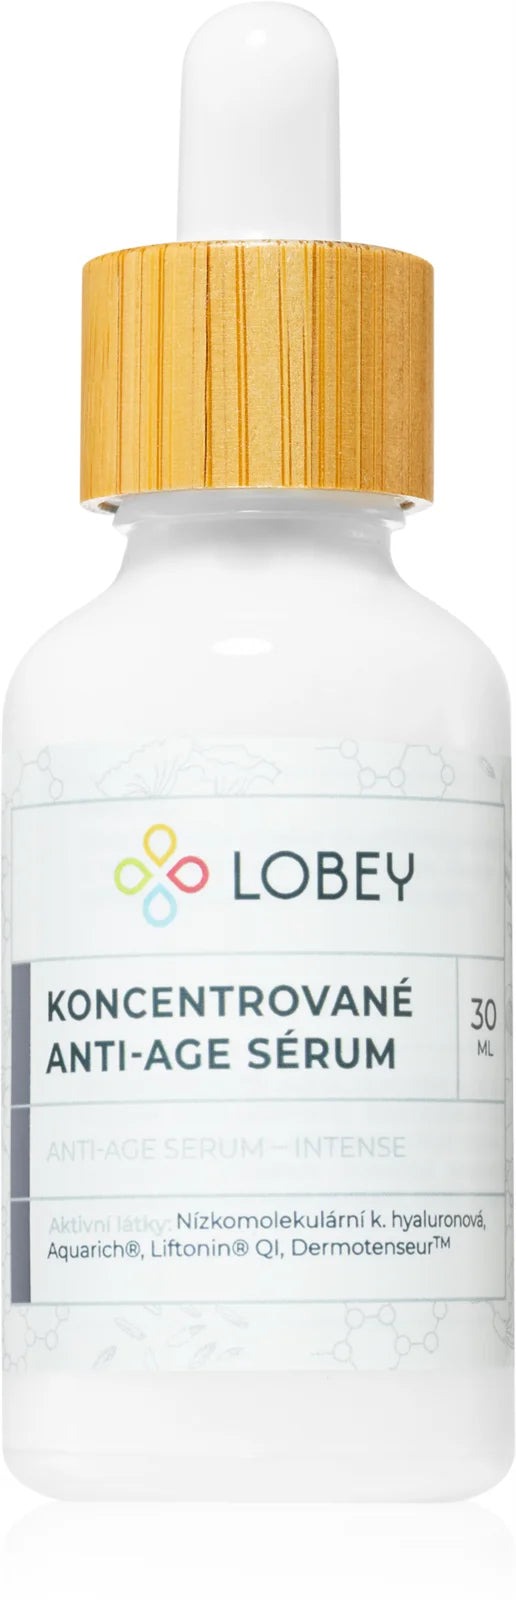 Lobey Concentrated anti-age serum 30 ml